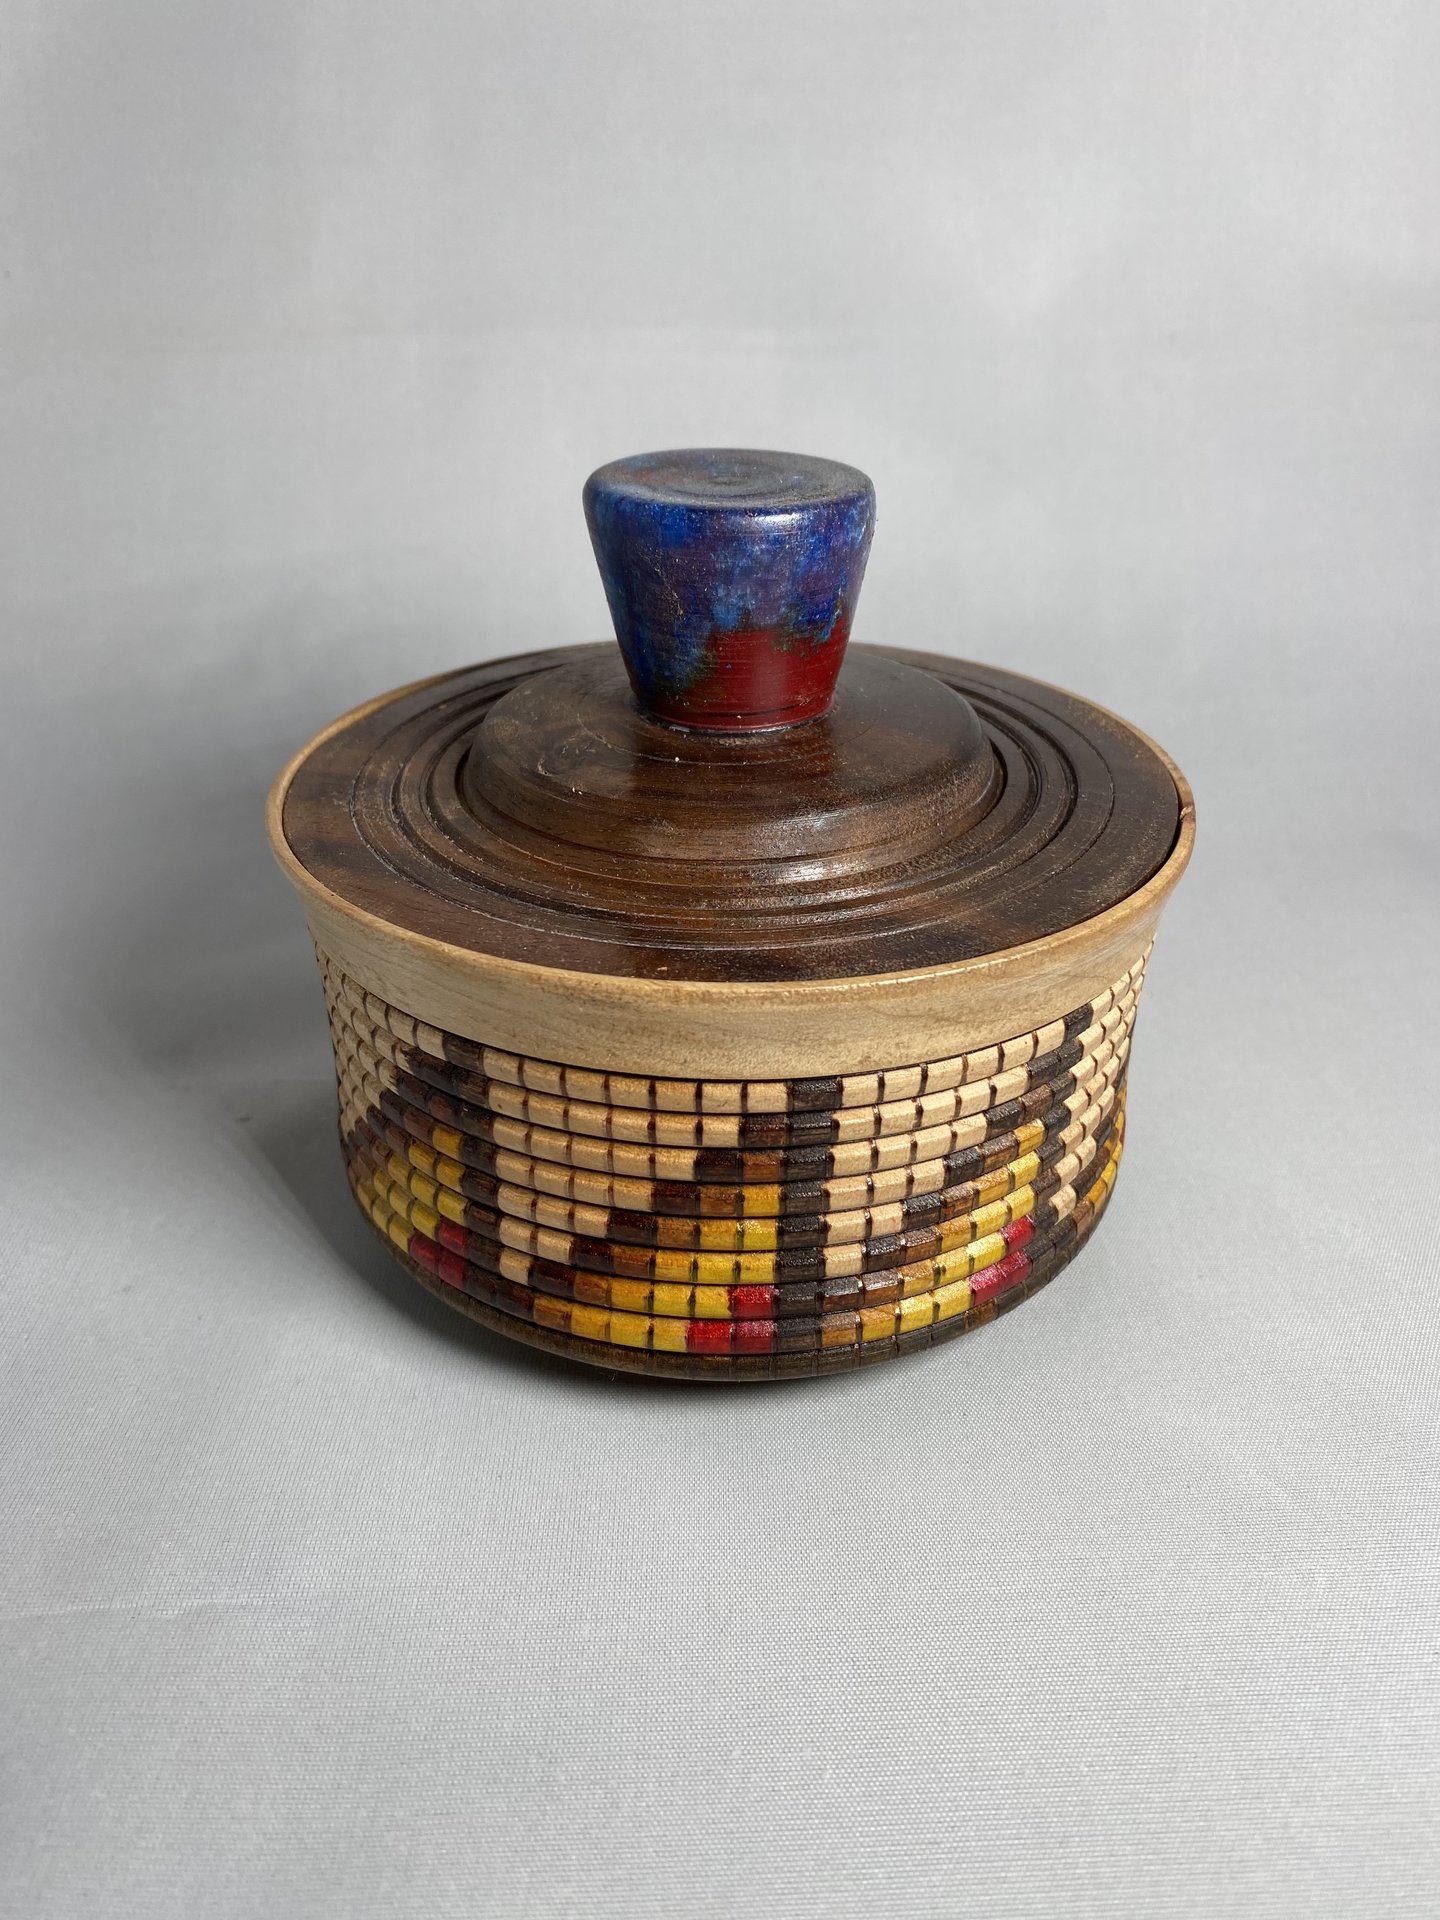 Small lidded box in basket illusion pattern